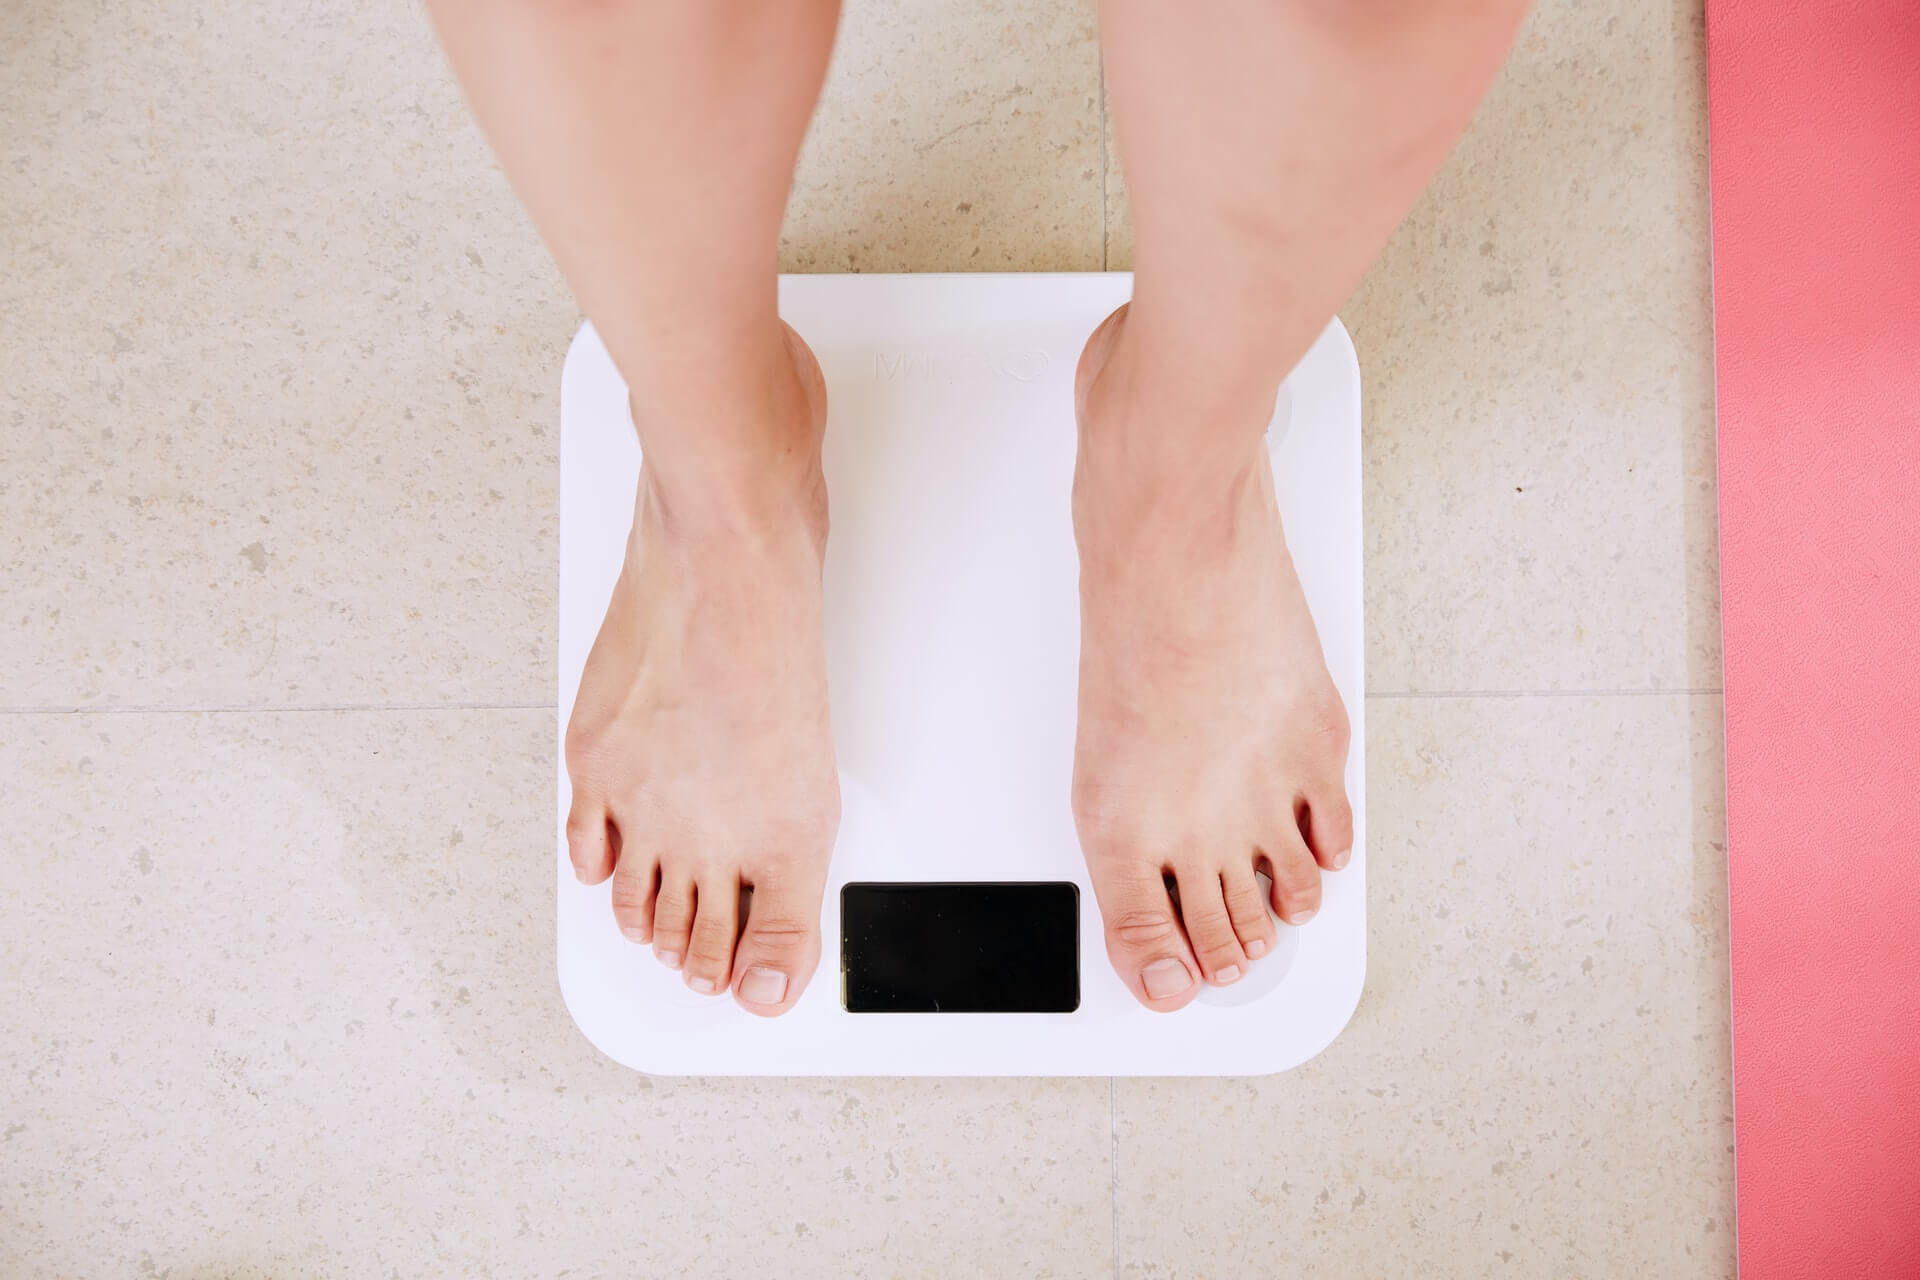 a person on a weighing scale